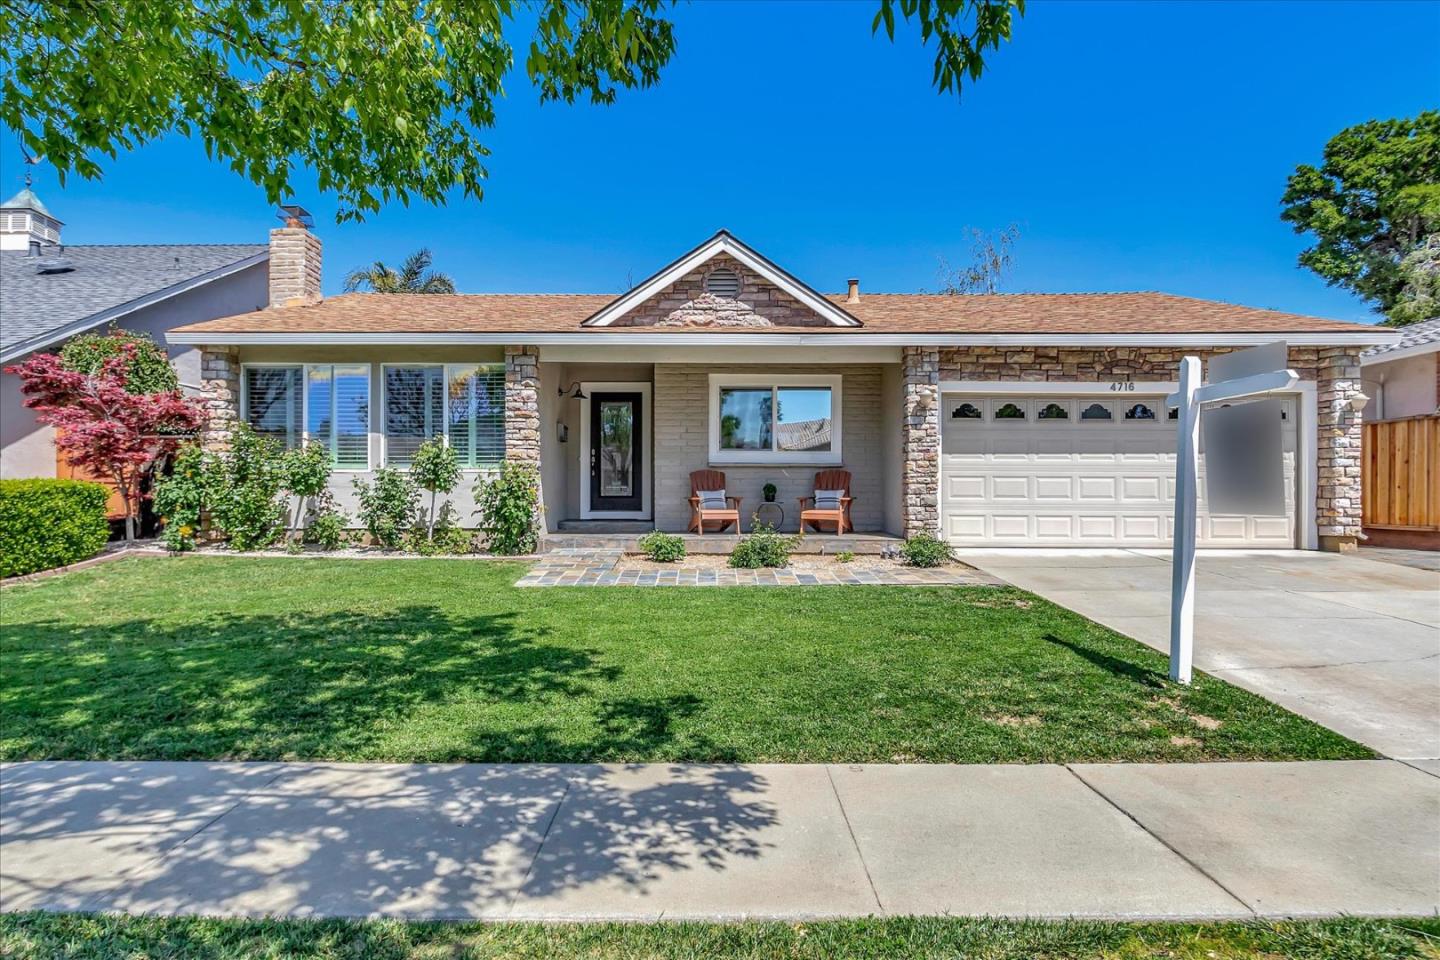 Photo of 4716 Tampico Wy in San Jose, CA